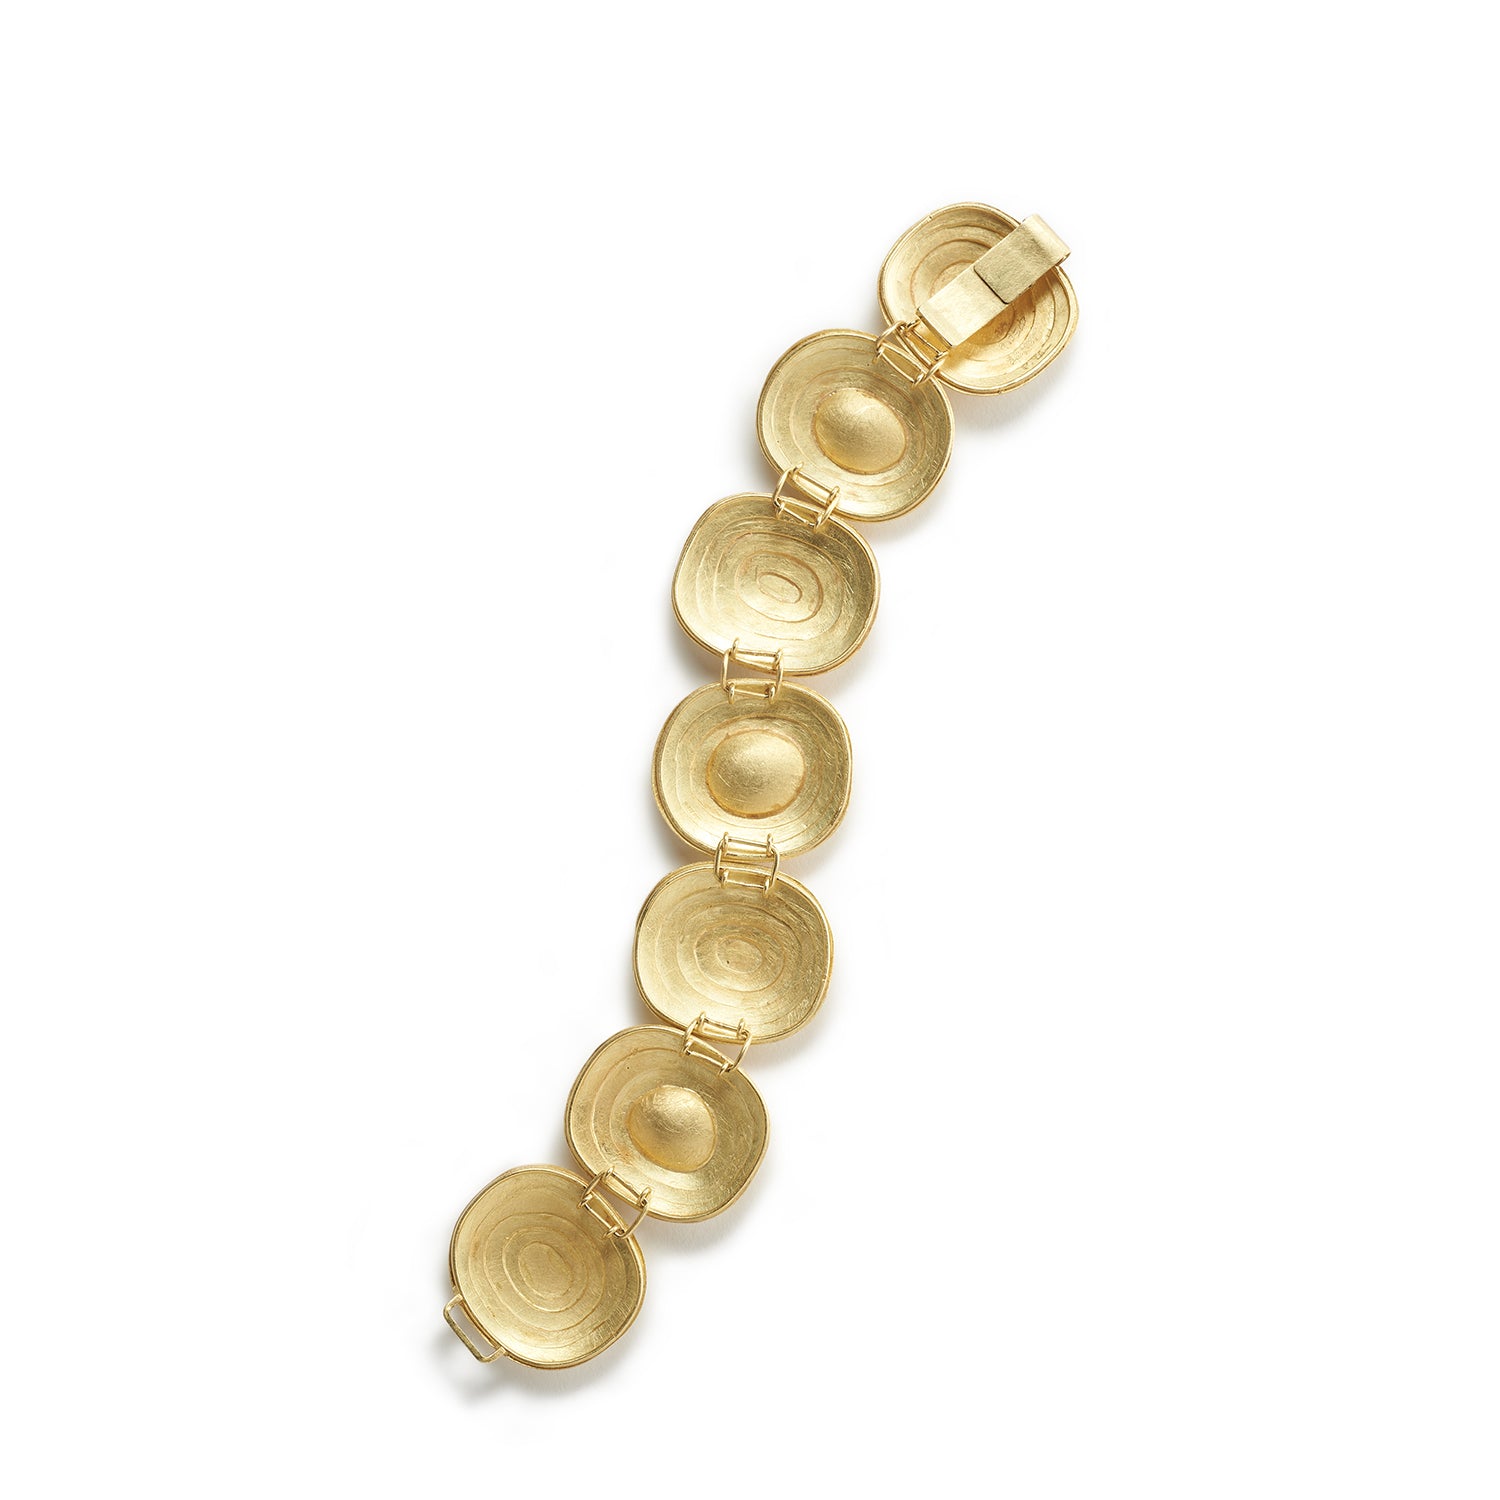 Topographical Gold & Faceted Tourmaline Bracelet